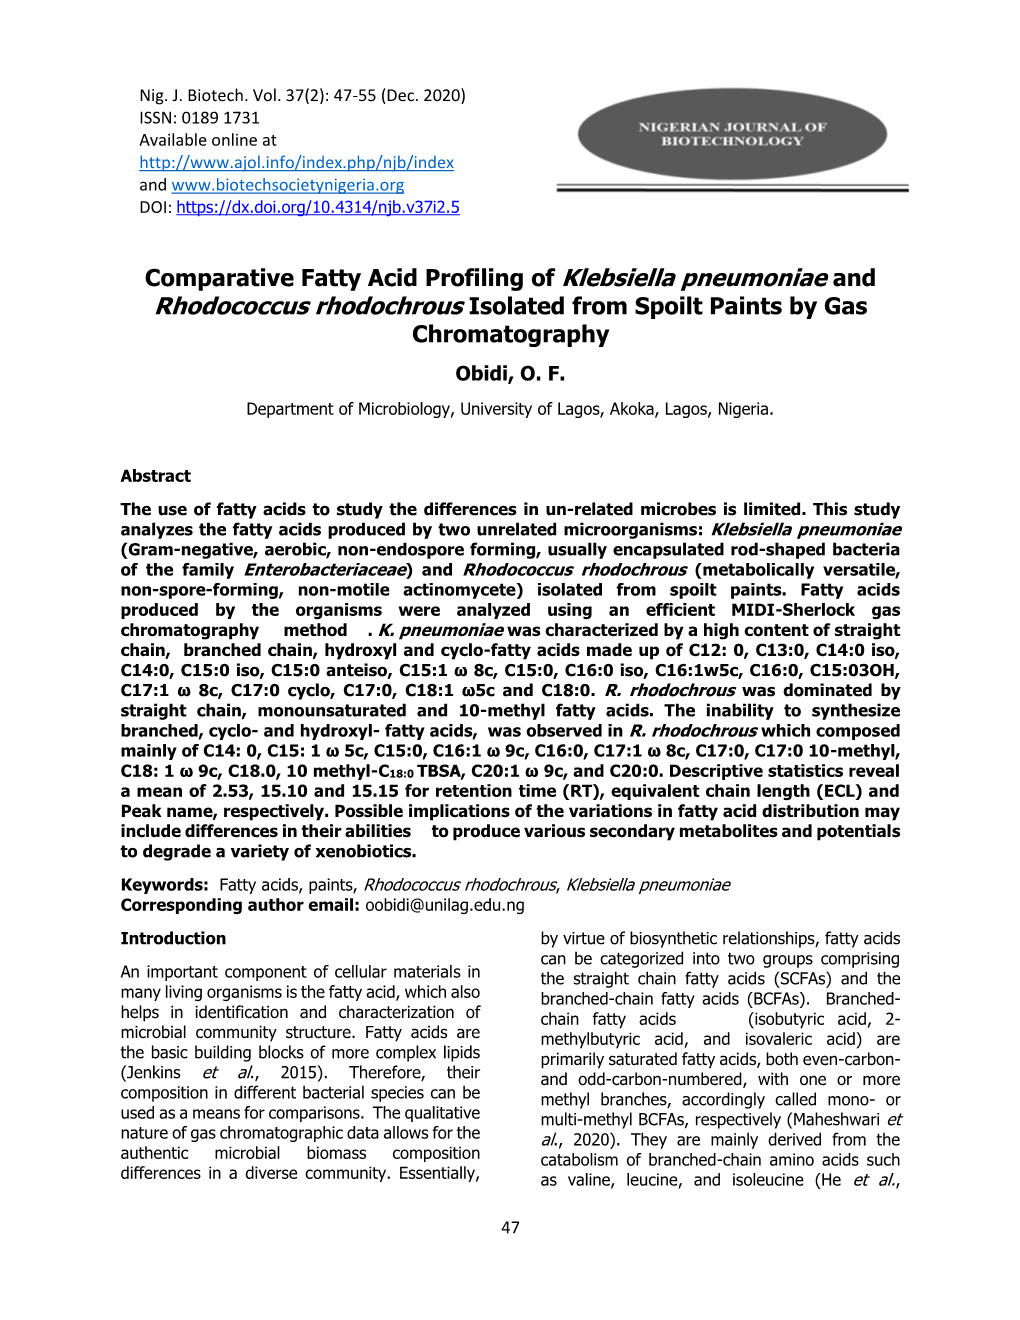 Comparative Fatty Acid Profiling of Klebsiella Pneumoniae and Rhodococcus Rhodochrous Isolated from Spoilt Paints by Gas Chromatography Obidi, O